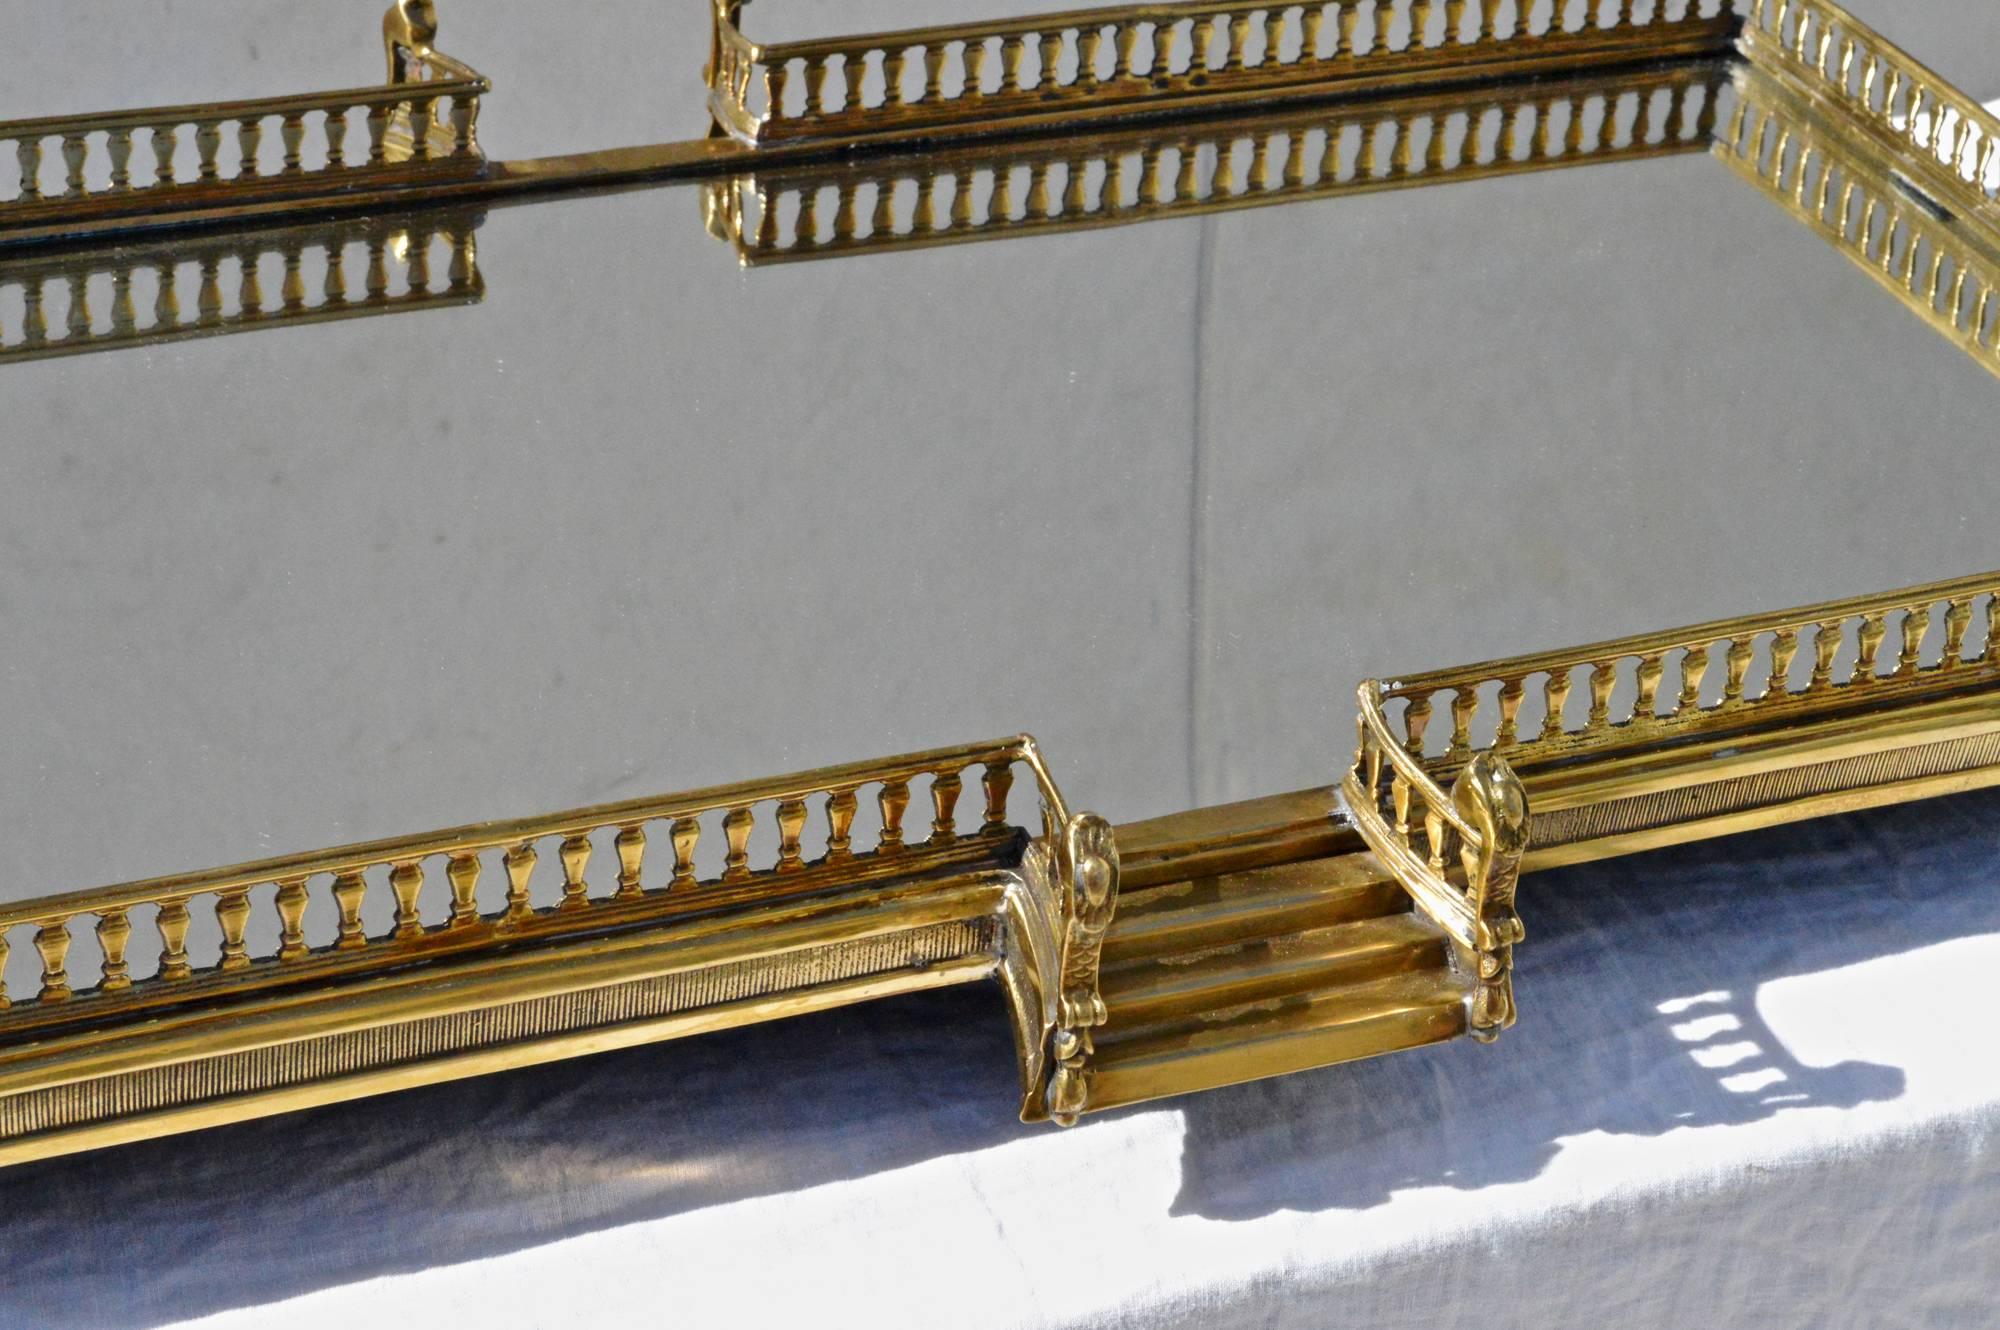 Cast Brass Serving Tray/Plateau with Stairs